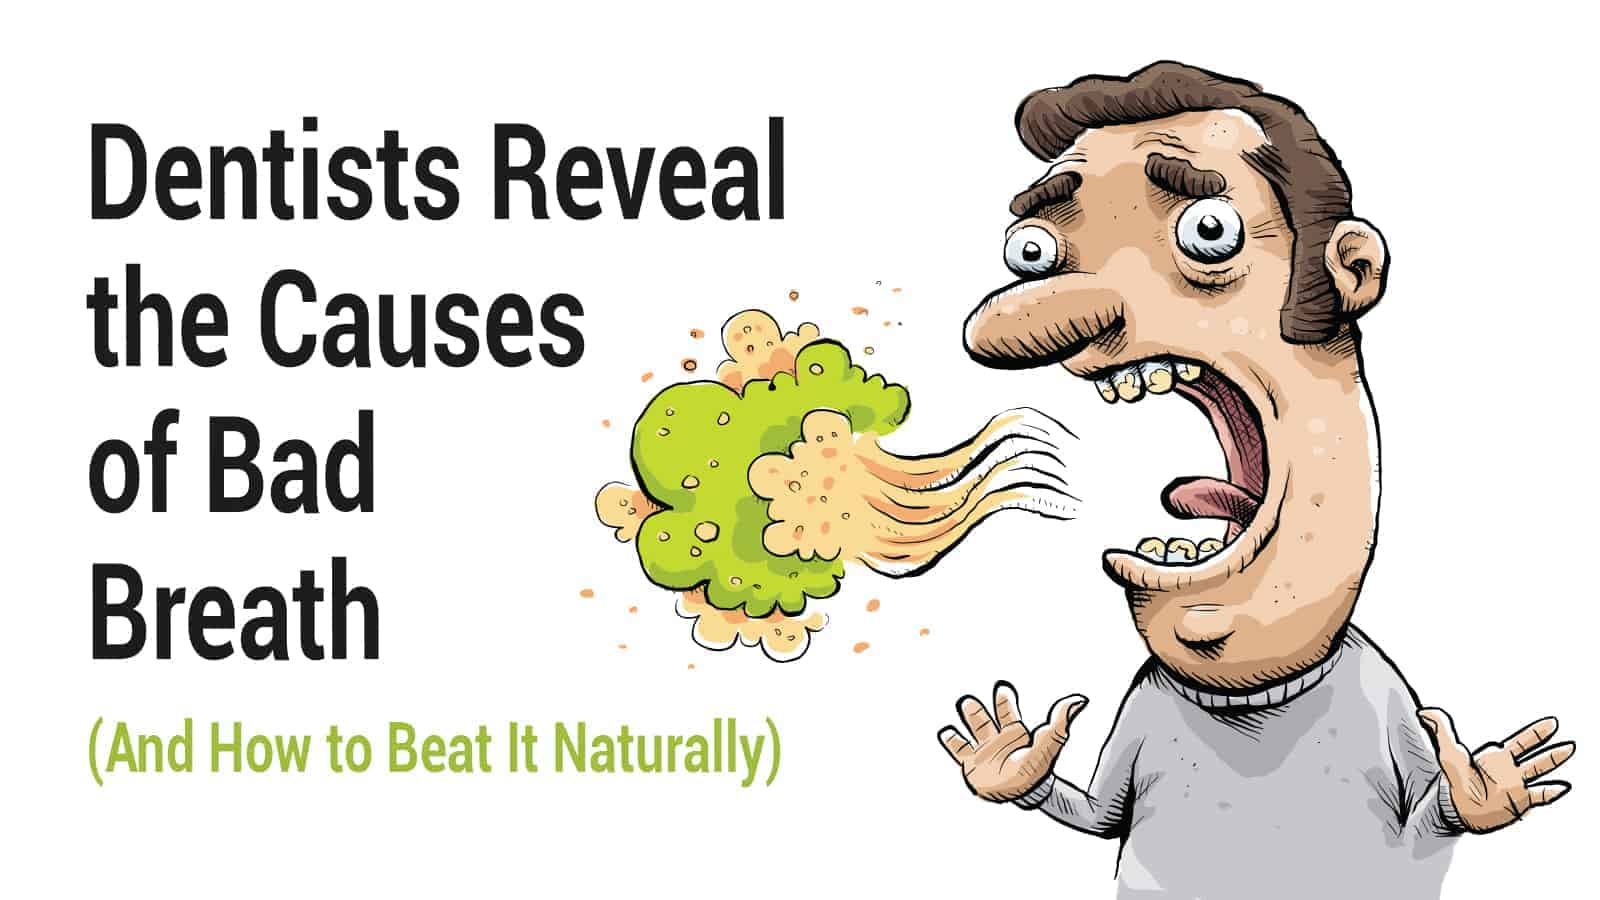 Dentists Reveal the Causes of Bad Breath (And How to Beat It Naturally)